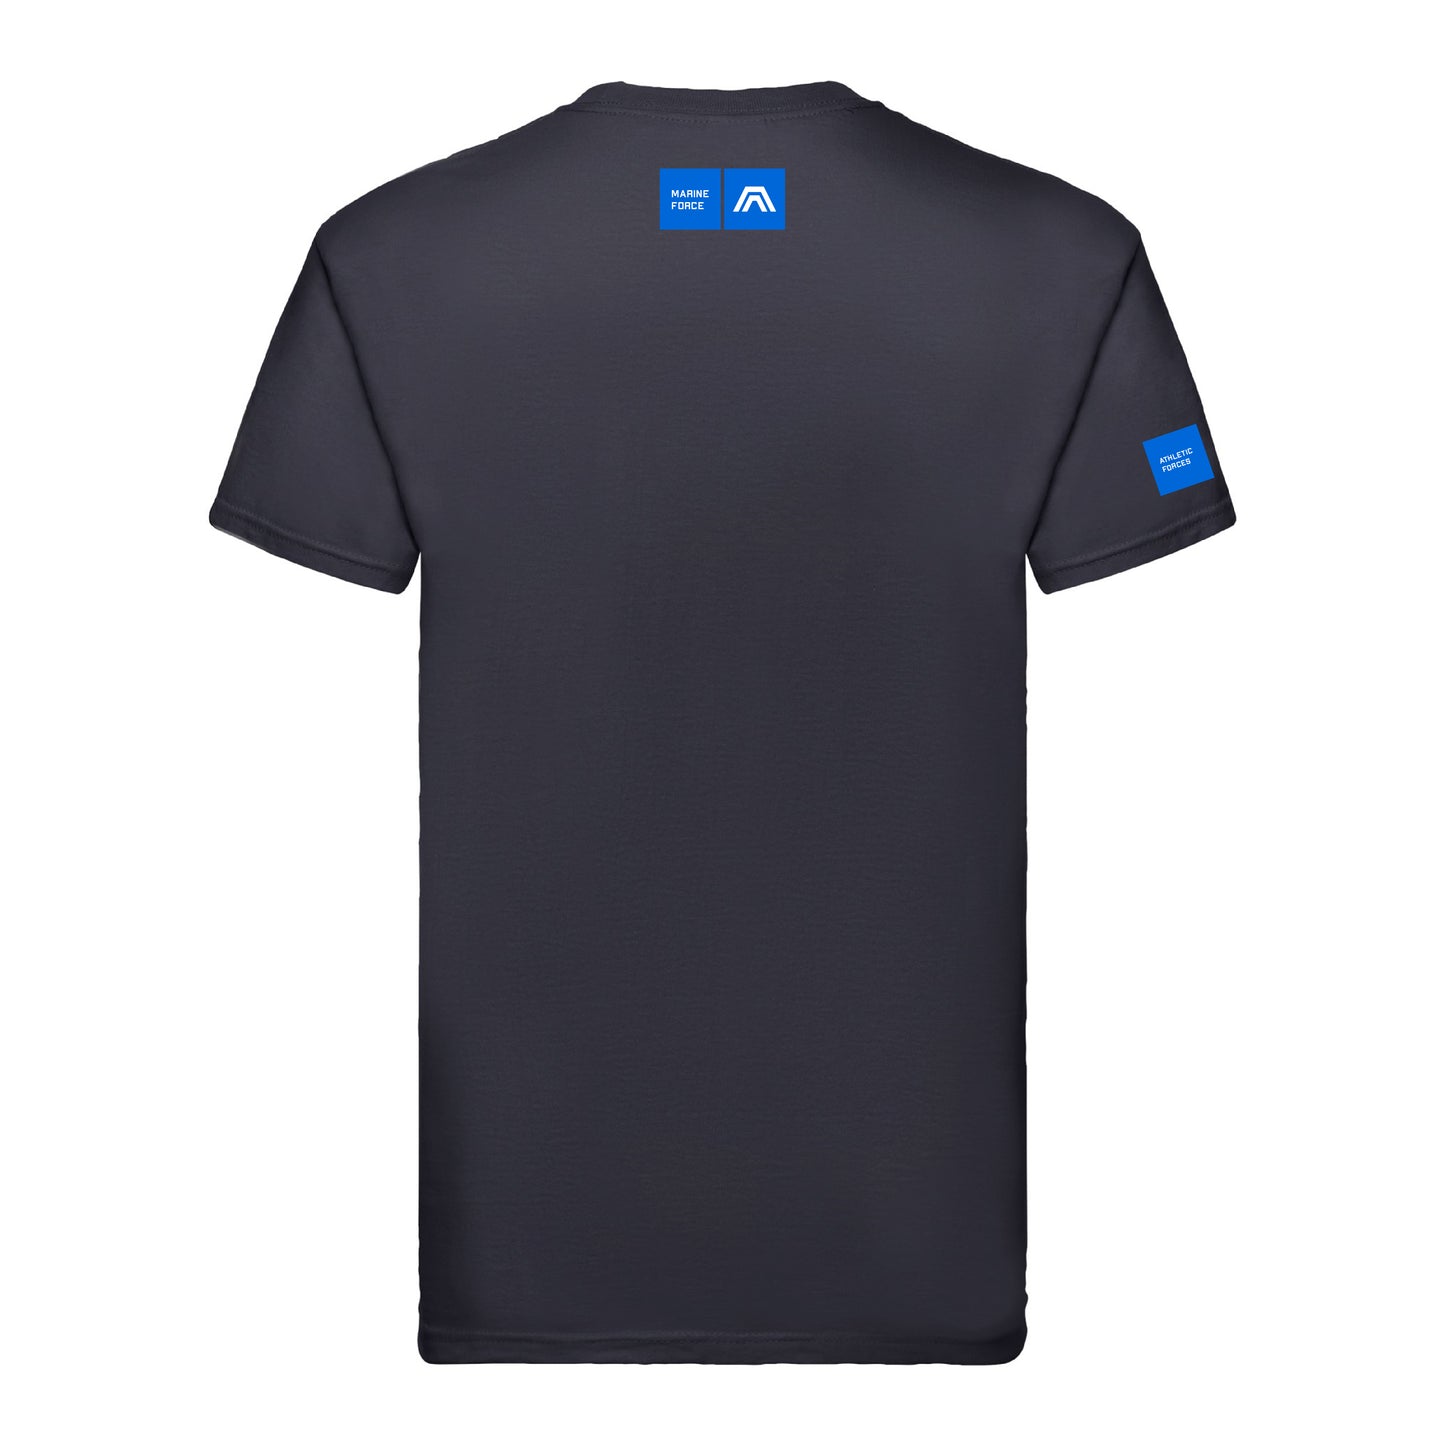 Marine Force ® Fluctuation T-Shirt